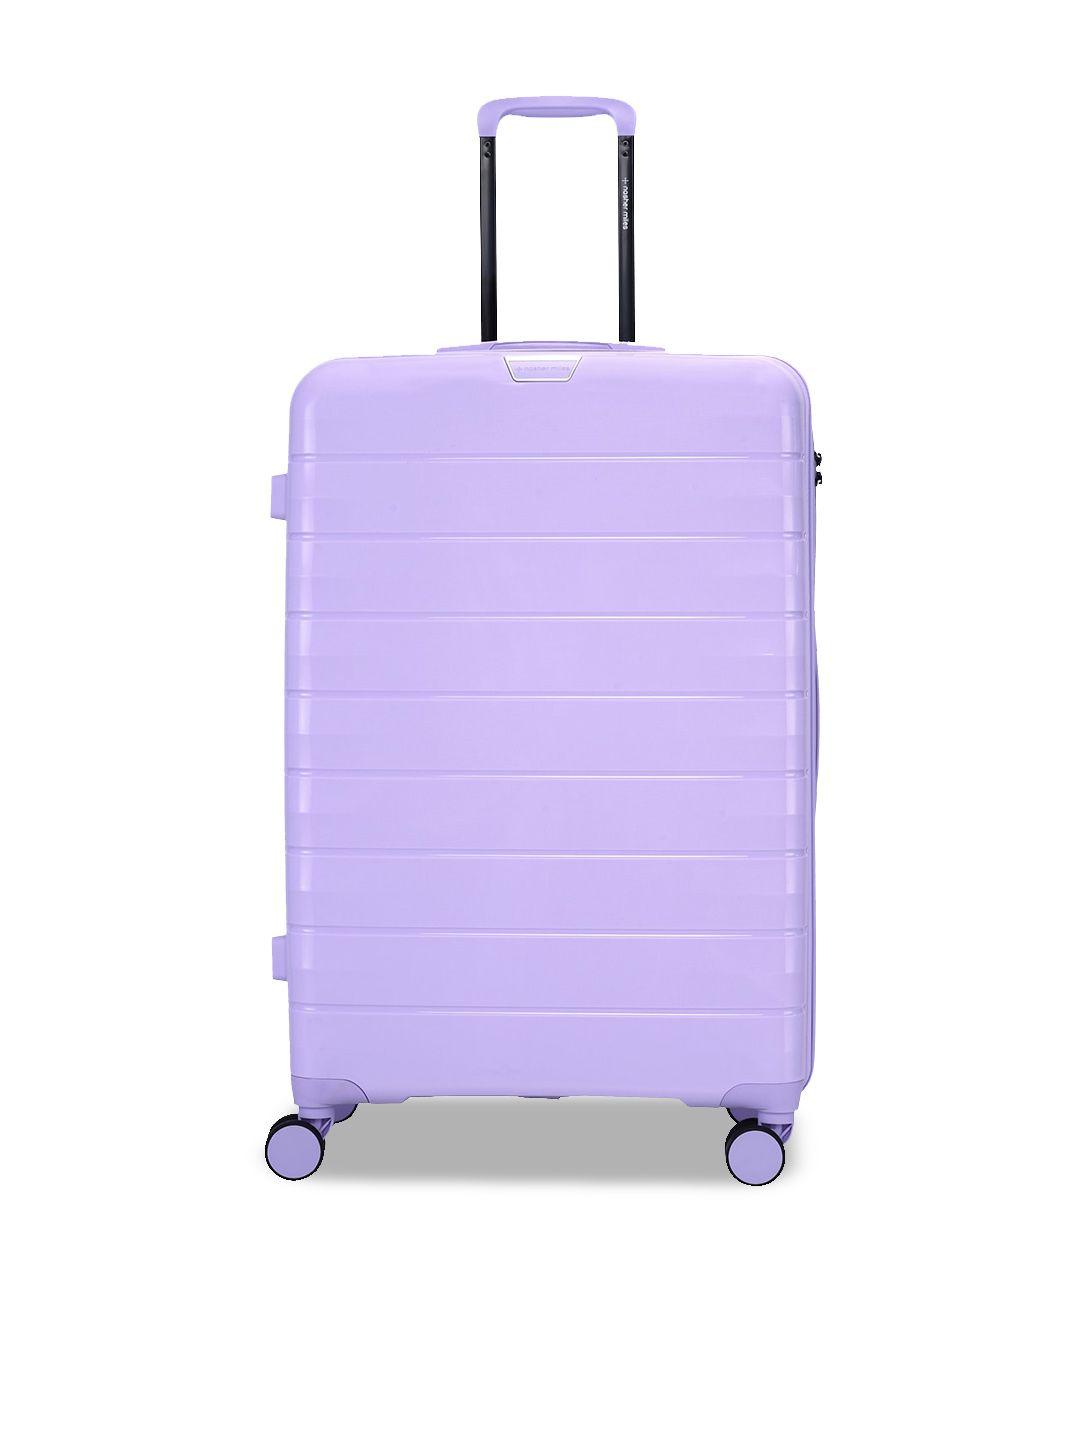 nasher miles vienna hard-sided large trolley suitcase - 108 l